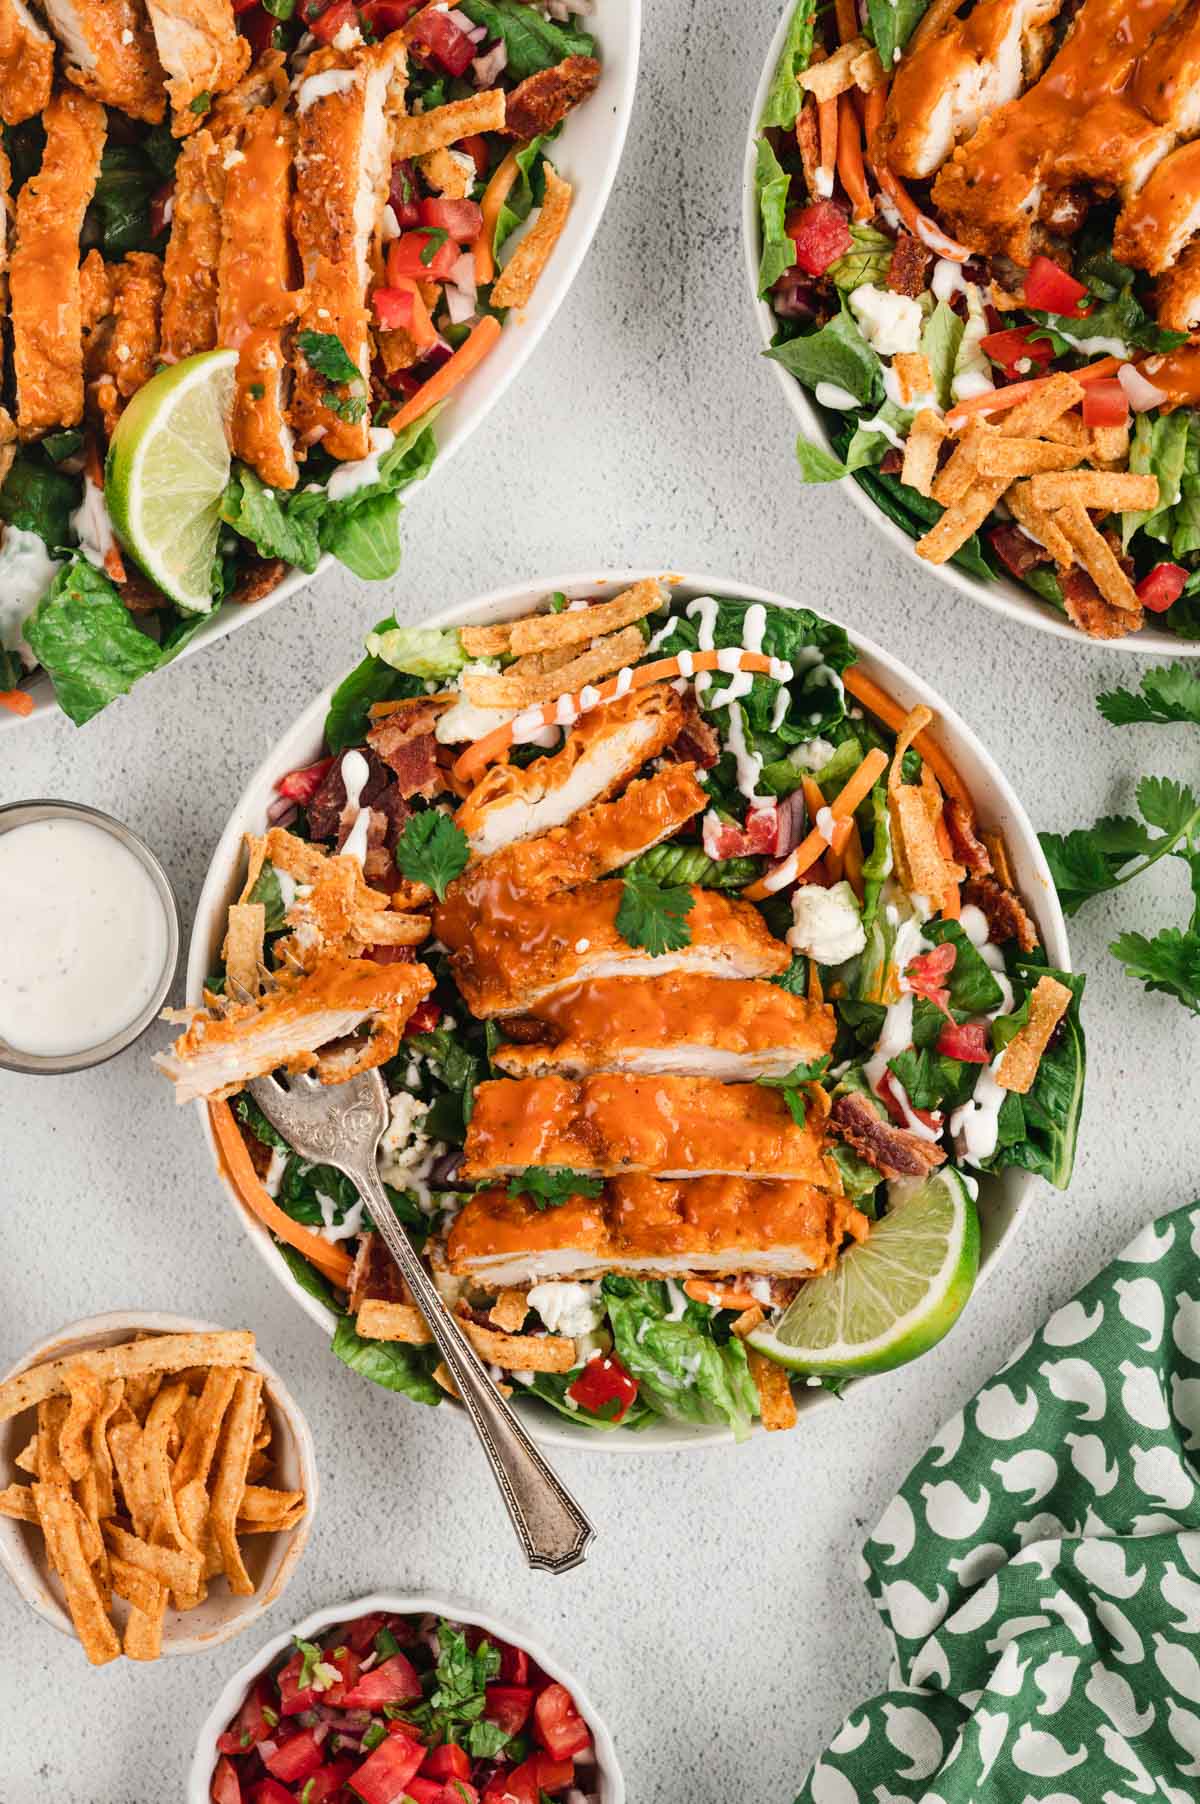 bowls of buffalo chicken with salad and small bowls of tortilla strips and pico de gallo.